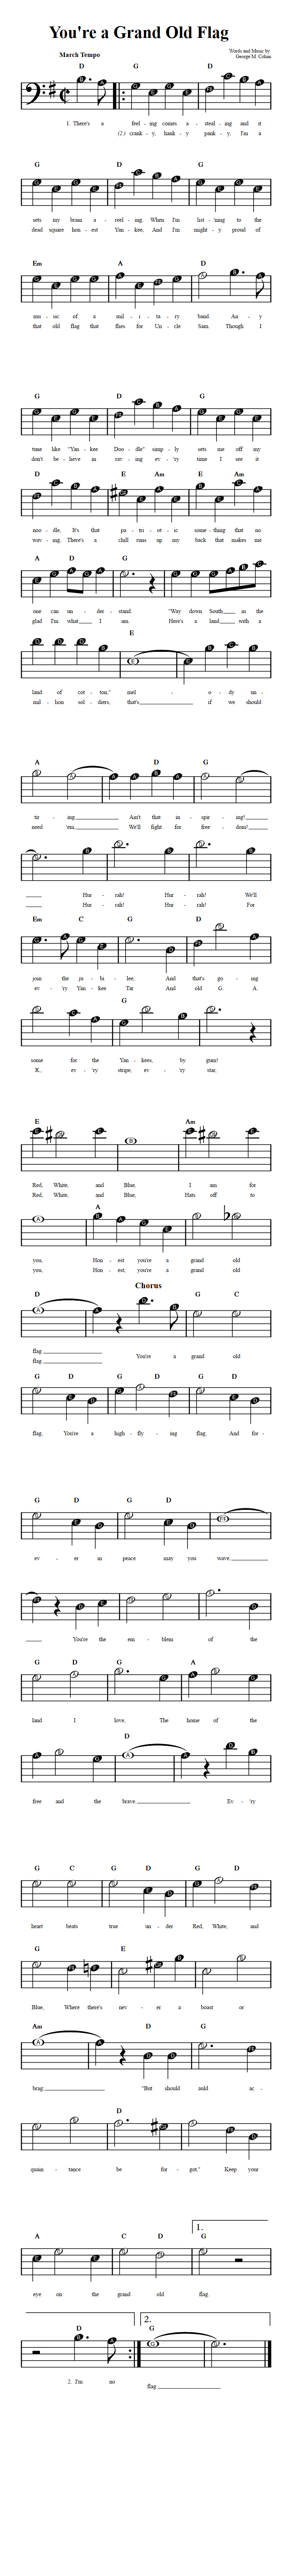 You're a Grand Old Flag  Beginner Bass Clef Sheet Music